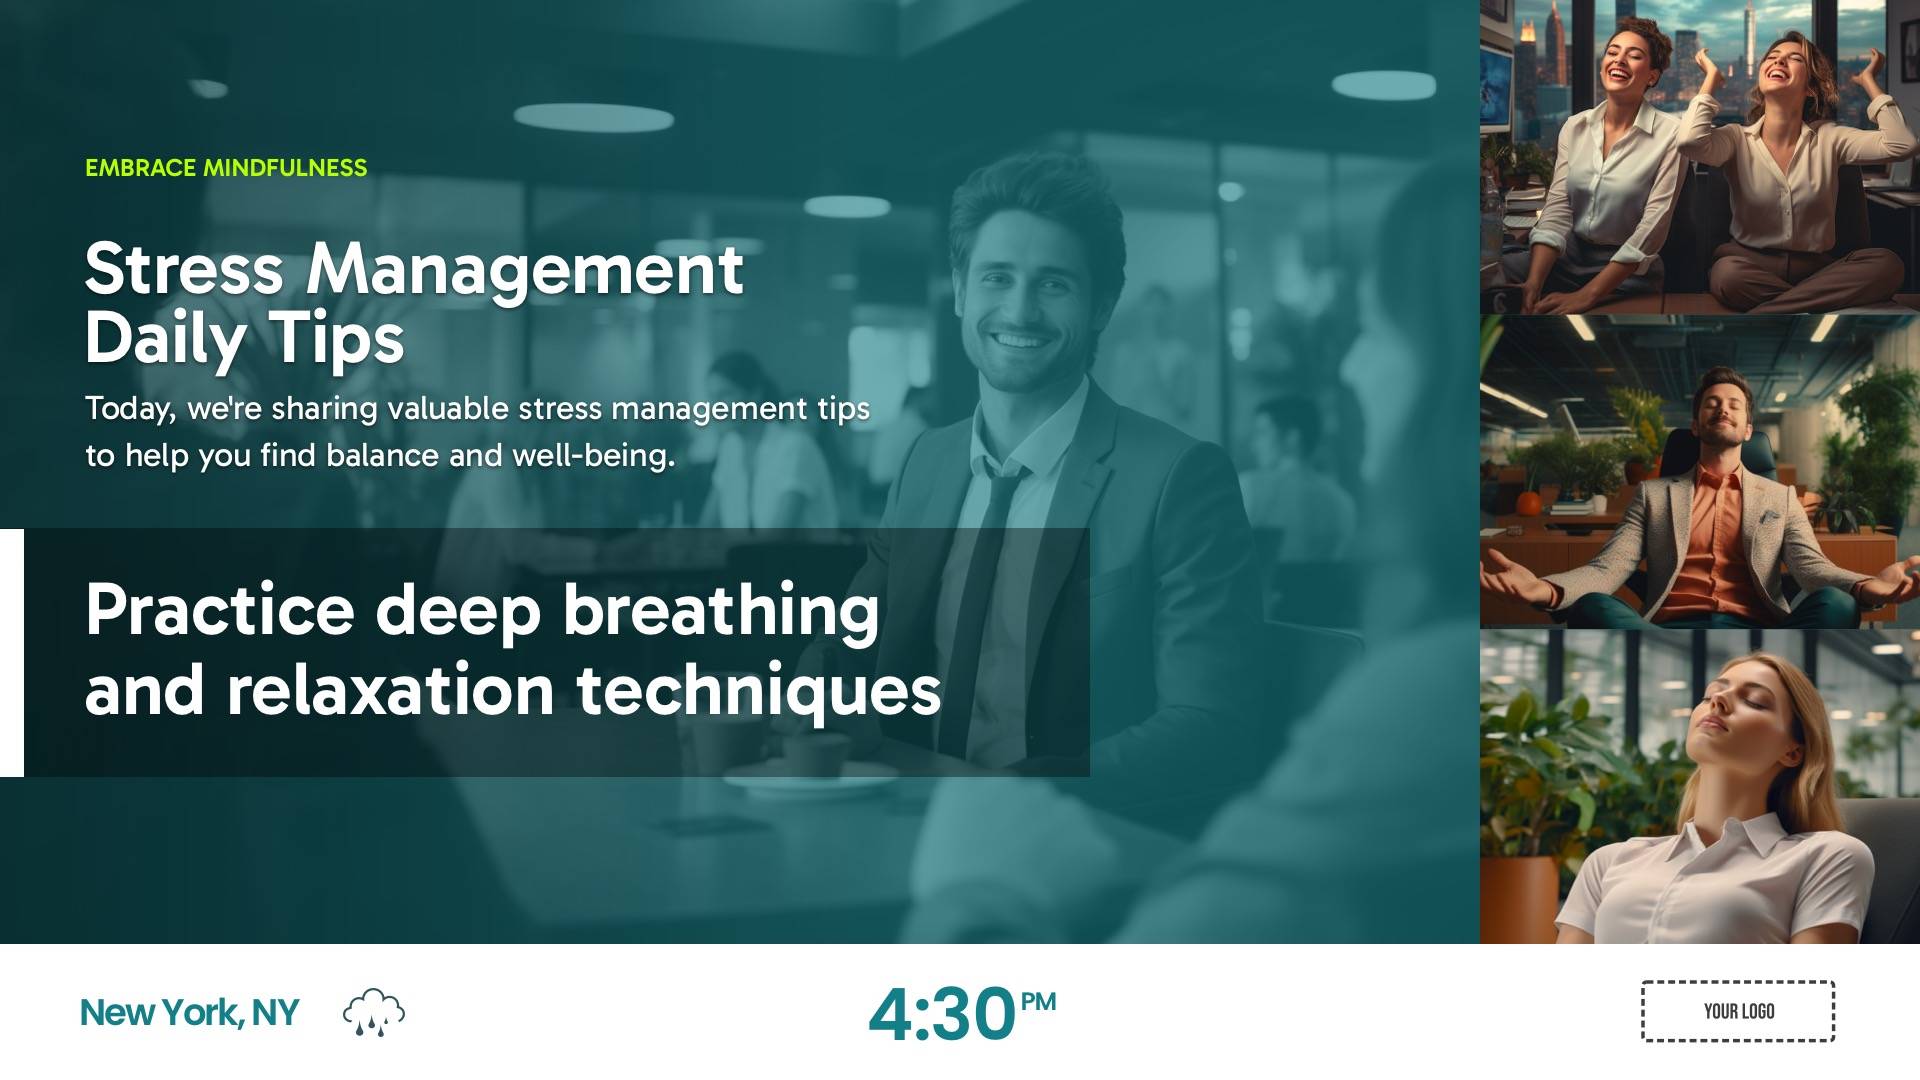 Stress Management Daily Tips Digital Signage Template